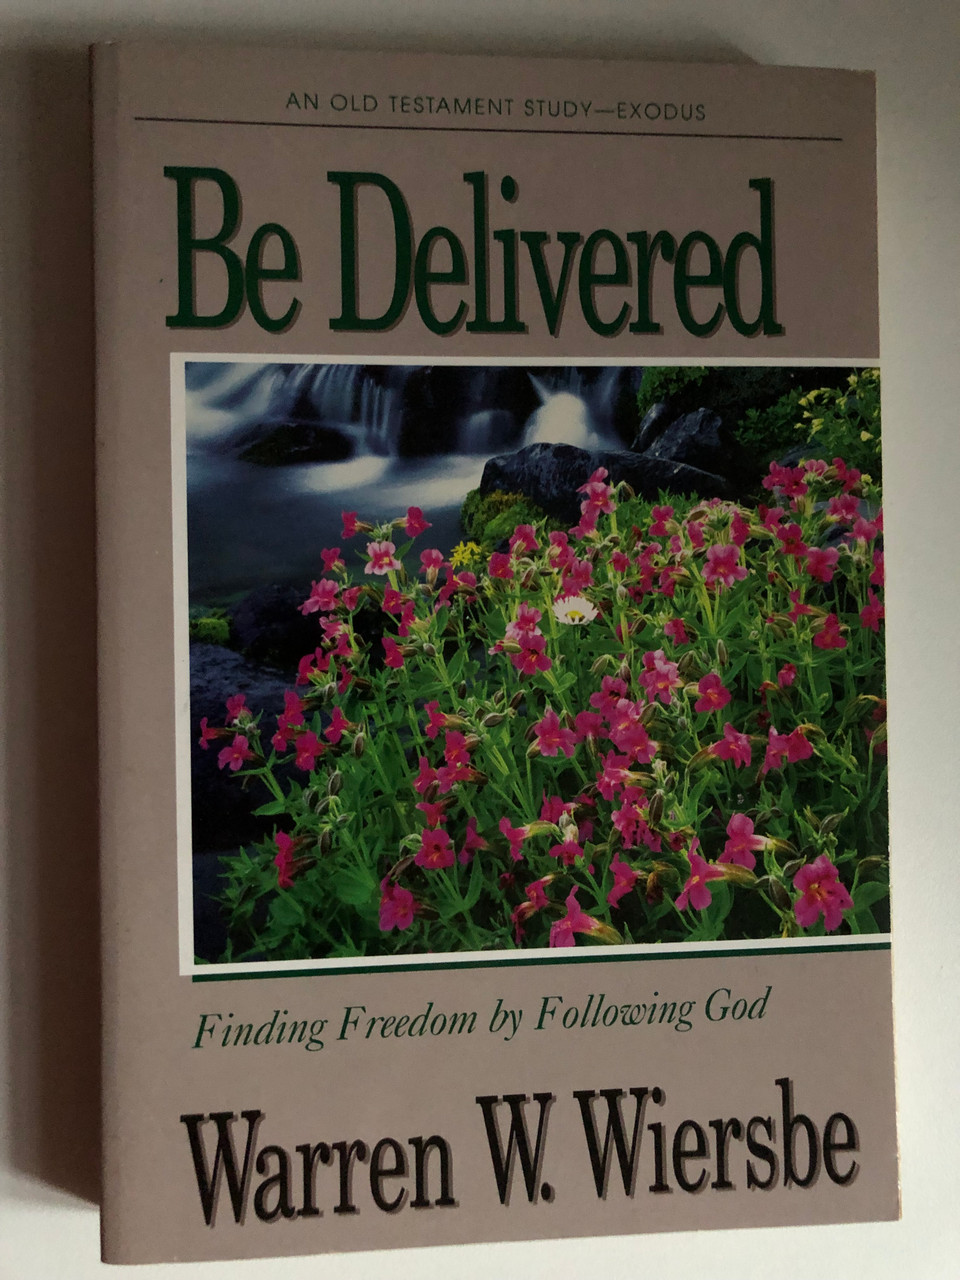 Be_Delivered_Exodus_Finding_Freedom_by_Following_God_The_BE_Series_Commentary_Personal_and_Group_Study_Guide_Included_Finding_Freedom_by_Following_God_AN_OLD_TESTAM___68582.1690625739.1280.1280.JPG (960×1280)